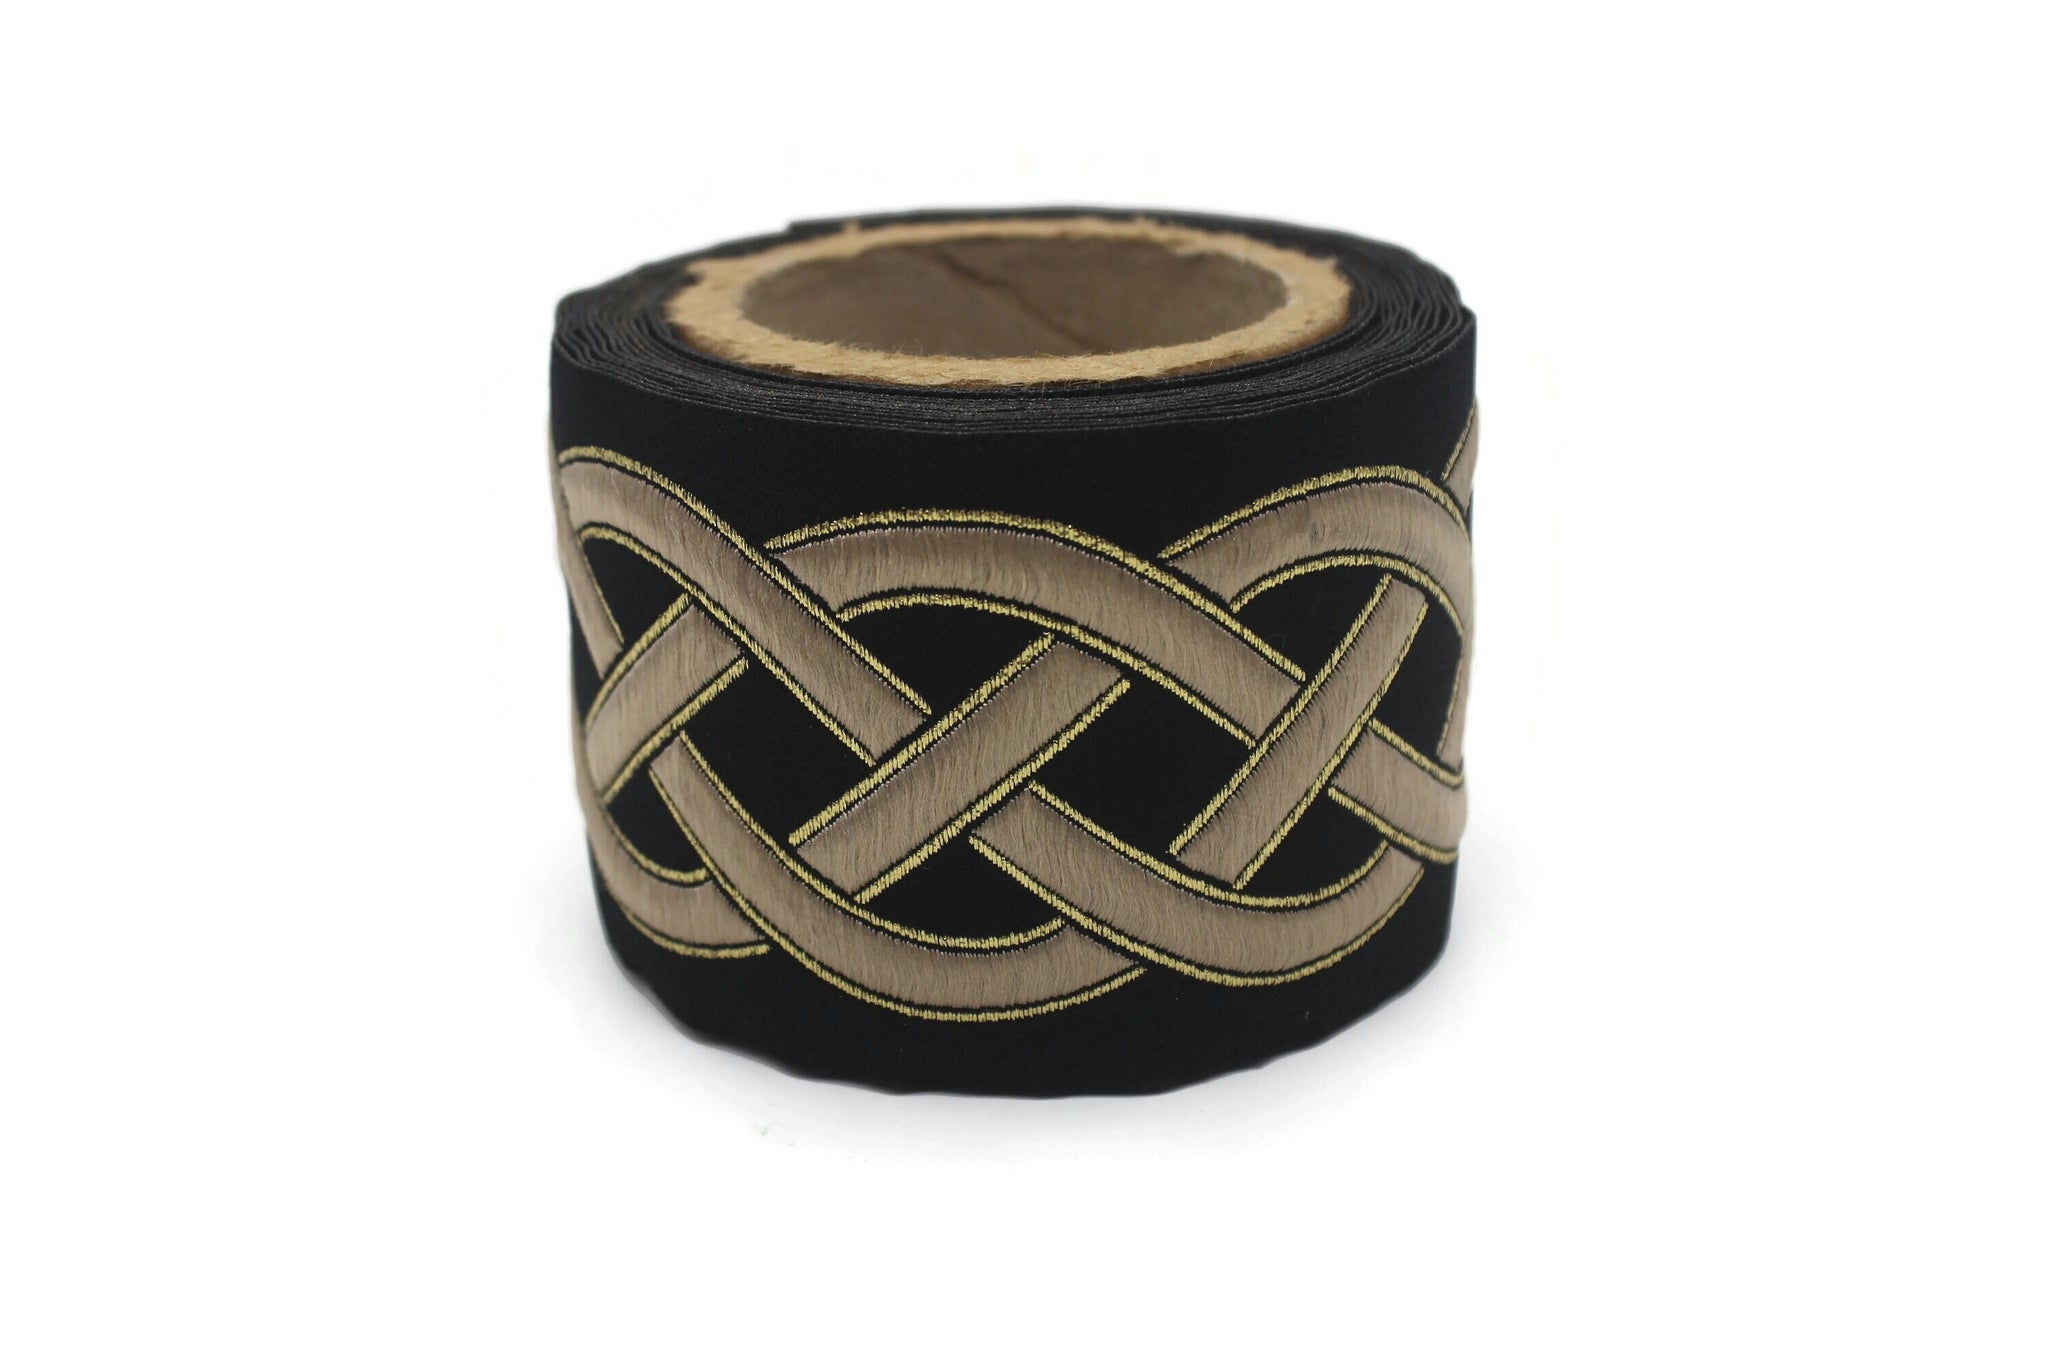 68 mm Black-Beige Celtic Knot Jacquard Ribbon for Drapery (2.67 inch), Trim Tape Border for Sewing Quilting Bridal Costumes, 0177 V5